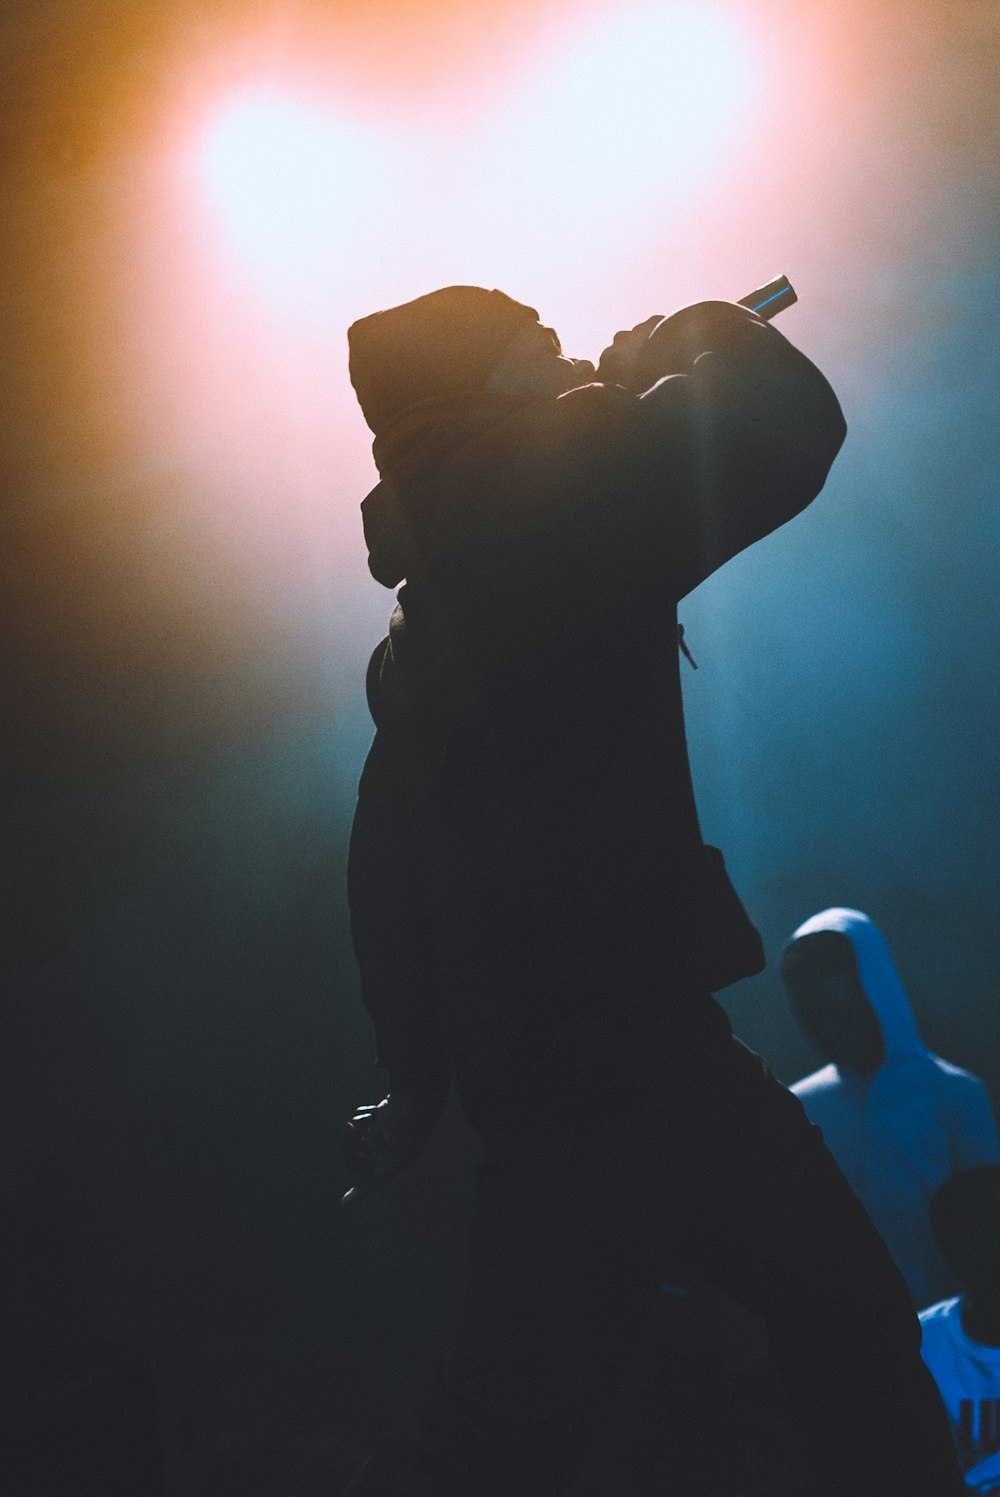 500+ Rapper Pictures | Download Free Images & Stock Photos on Unsplash